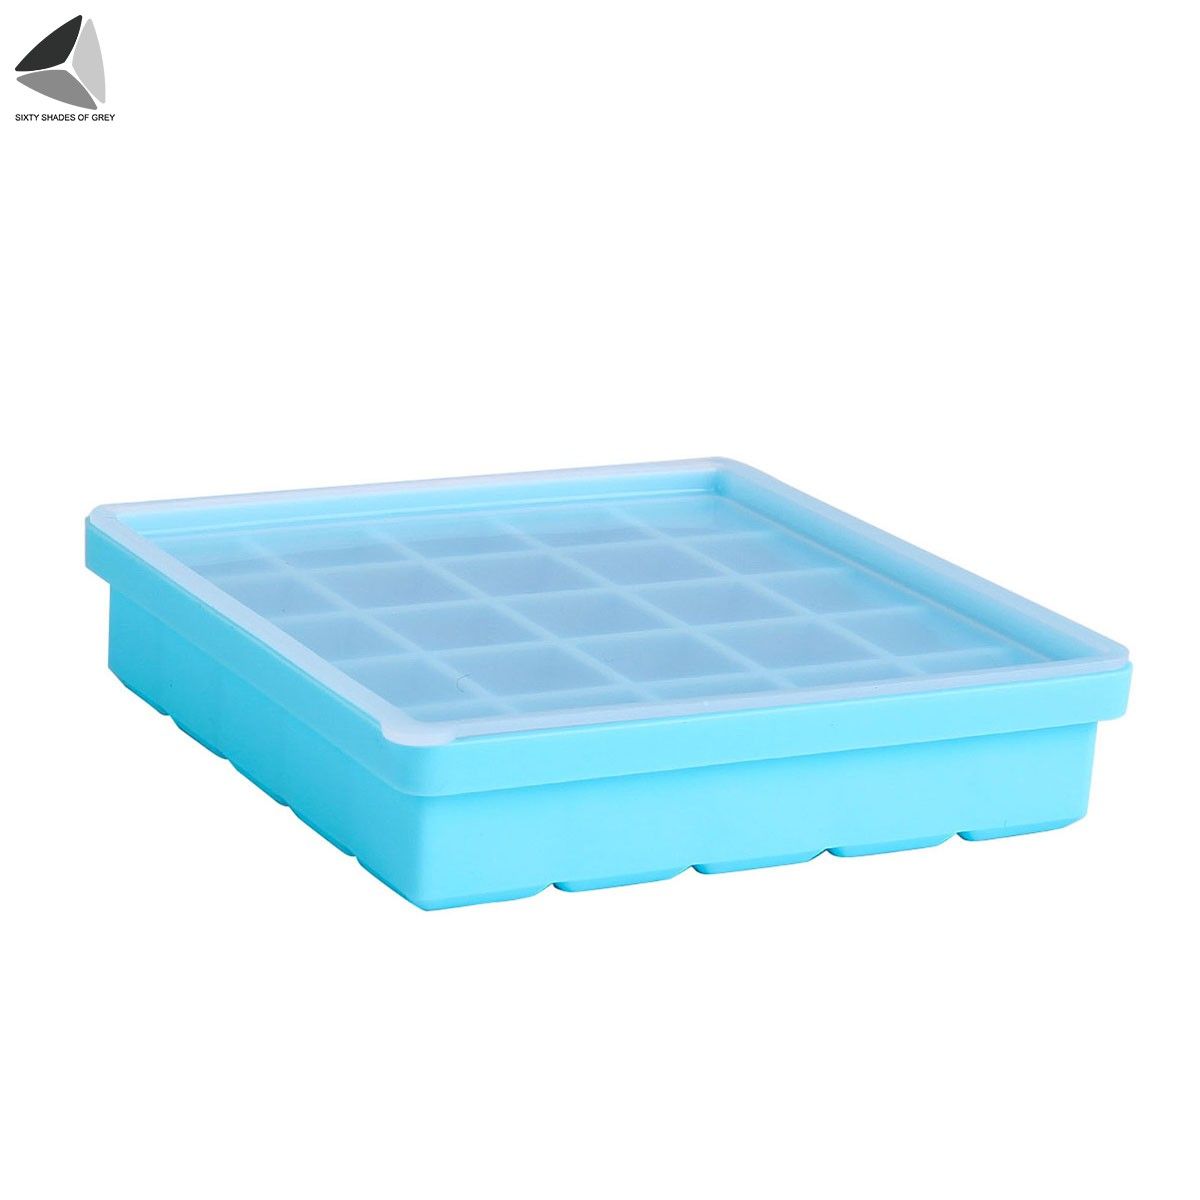 PULLIMORE 2 Pcs Ice Cube Trays 9 / 25 Pcs Square Flexible Easy Release Silicone Ice Maker Mold for Beverages Whiskey Wine Cocktail Coffee Juice (9 + 25 Gird) - image 4 of 9